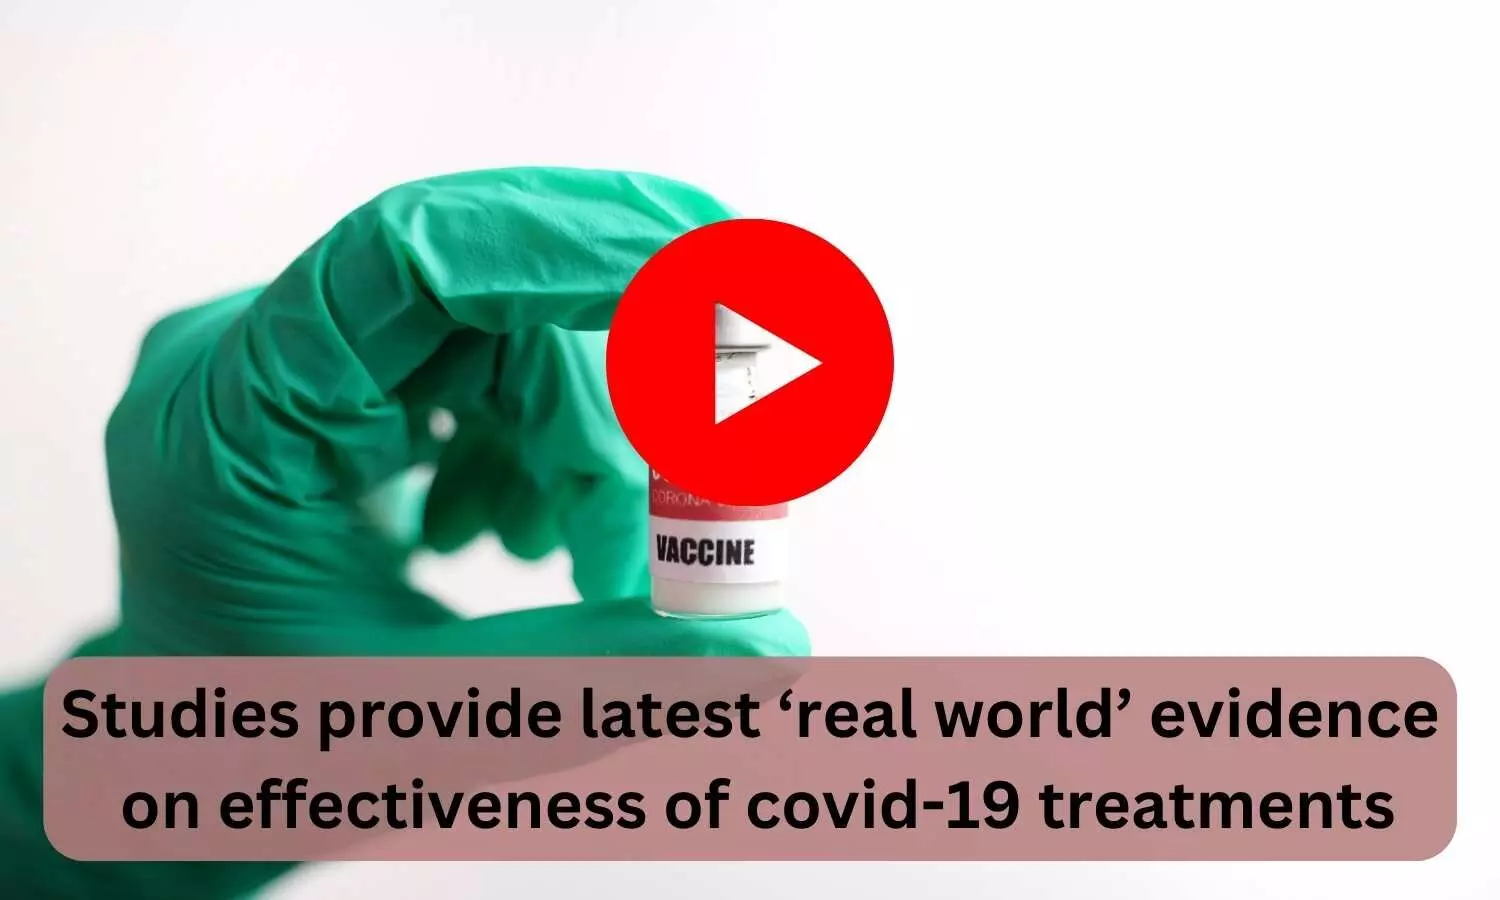 Studies provide latest real world evidence on effectiveness of covid-19 treatments